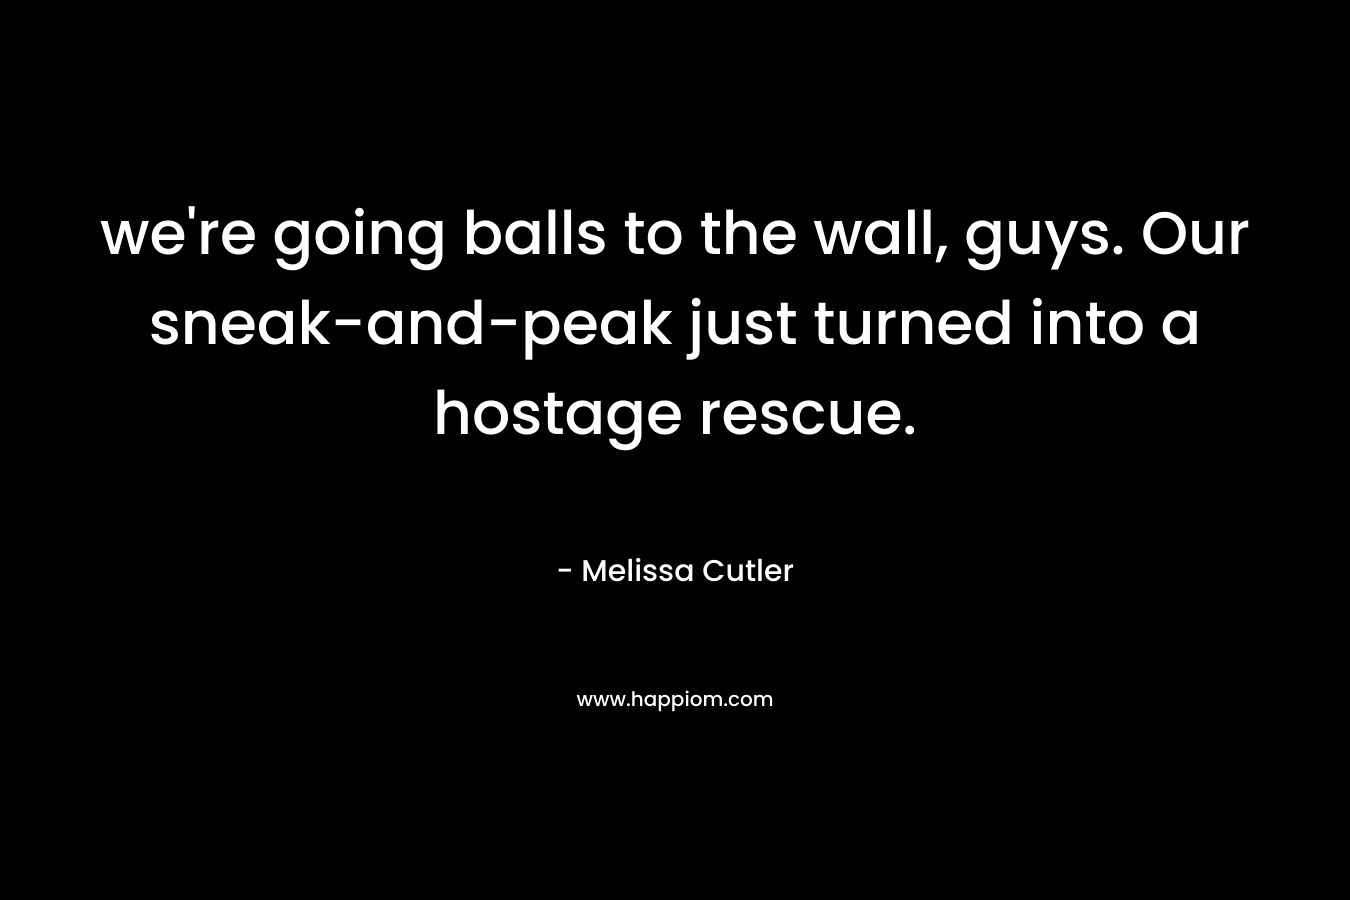 we’re going balls to the wall, guys. Our sneak-and-peak just turned into a hostage rescue. – Melissa Cutler